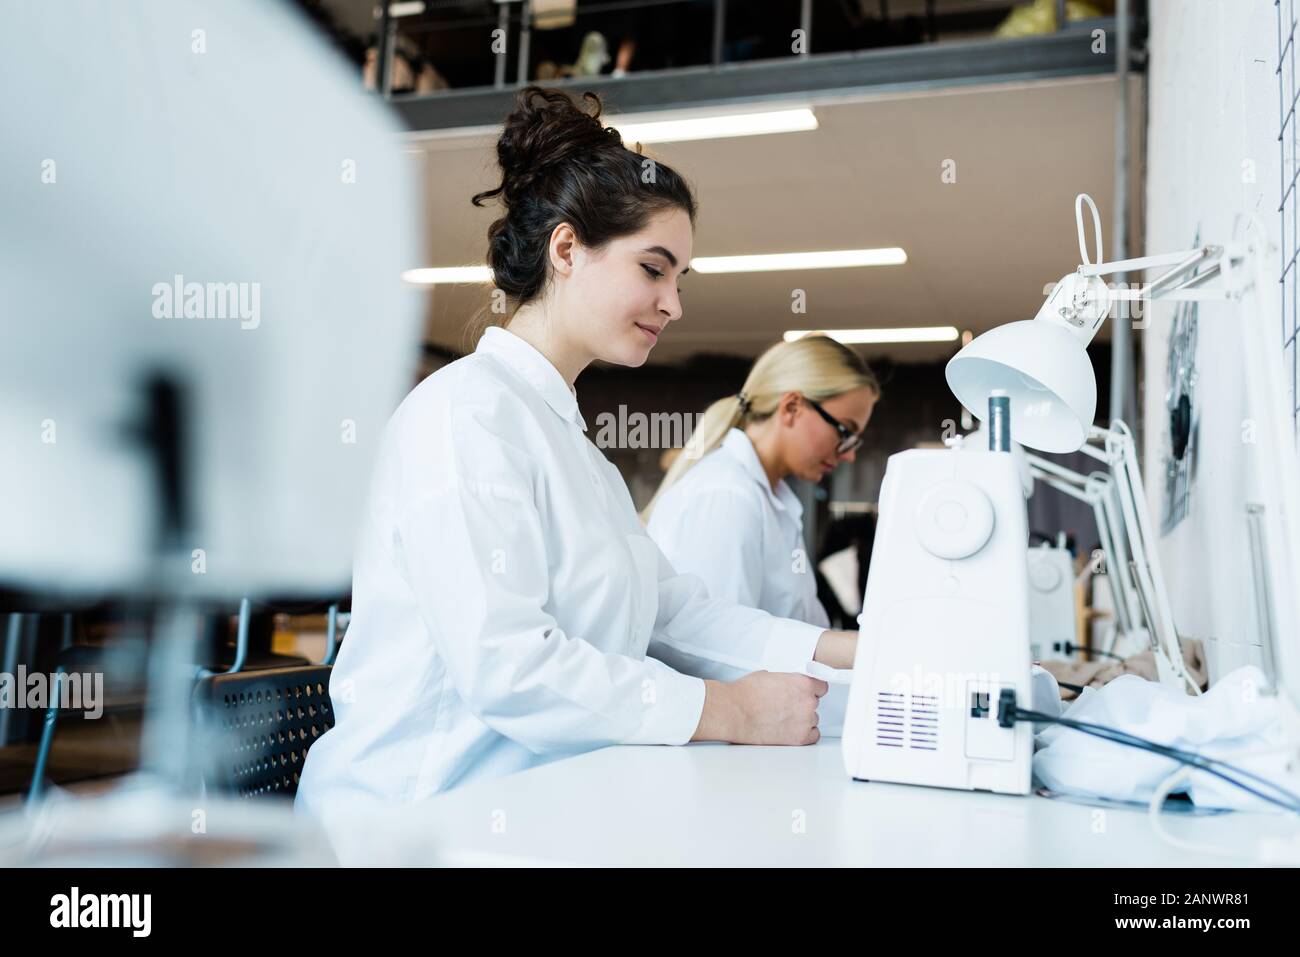 Women using sewing machines at factory Stock Photo